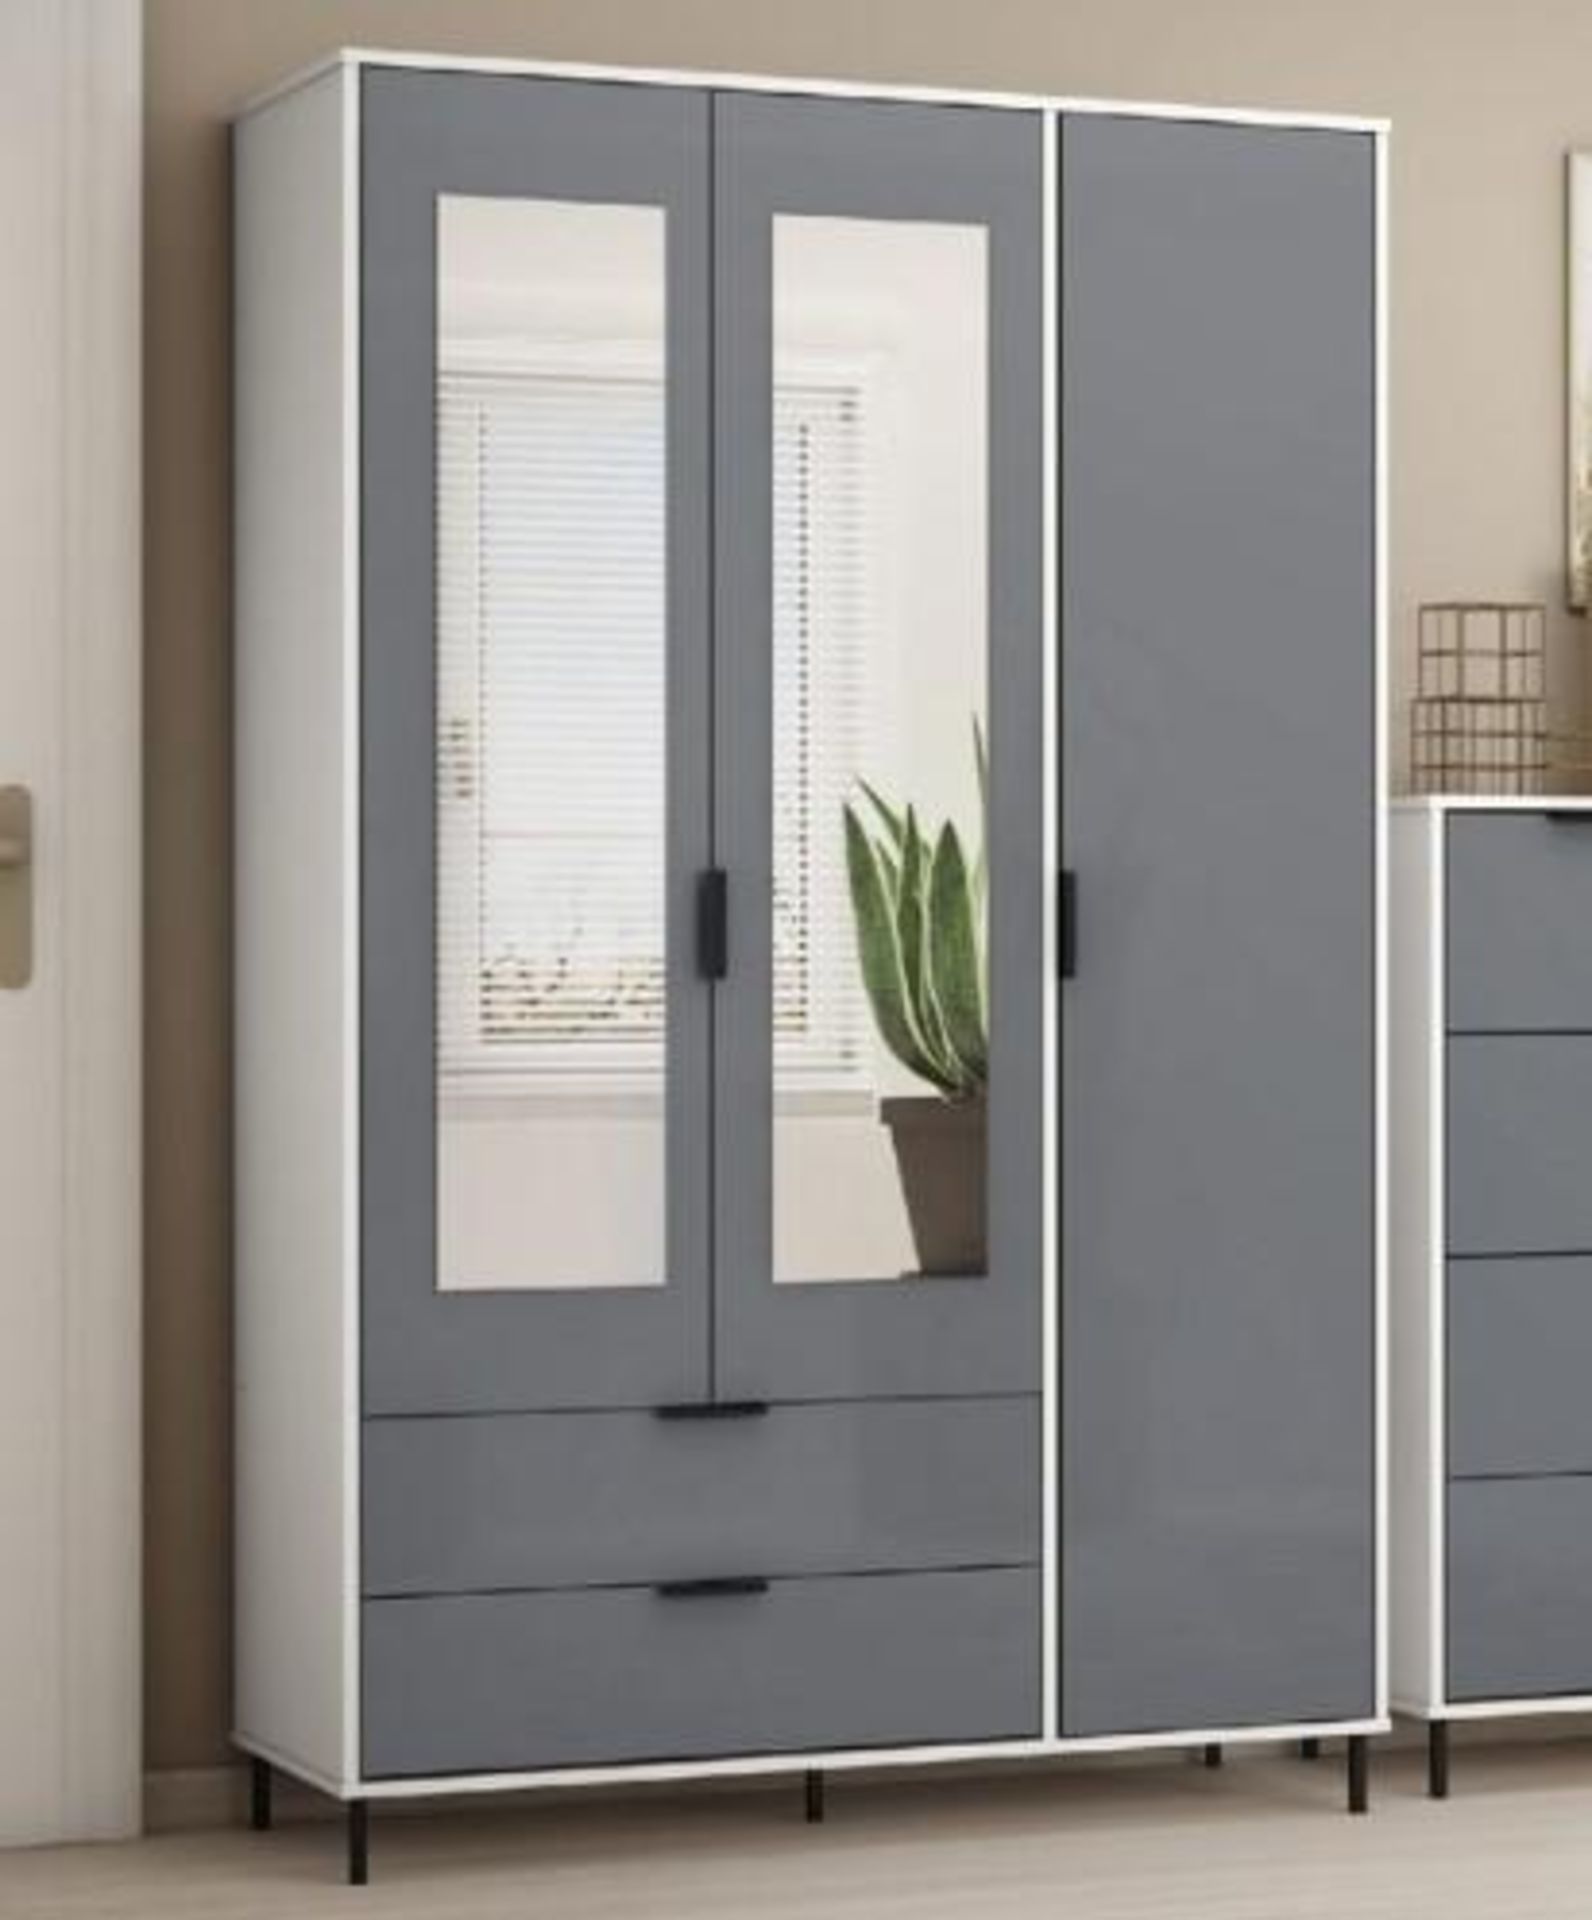 *BRAND NEW* Barcelona grey and white flat packed wardrobe. - Image 3 of 3